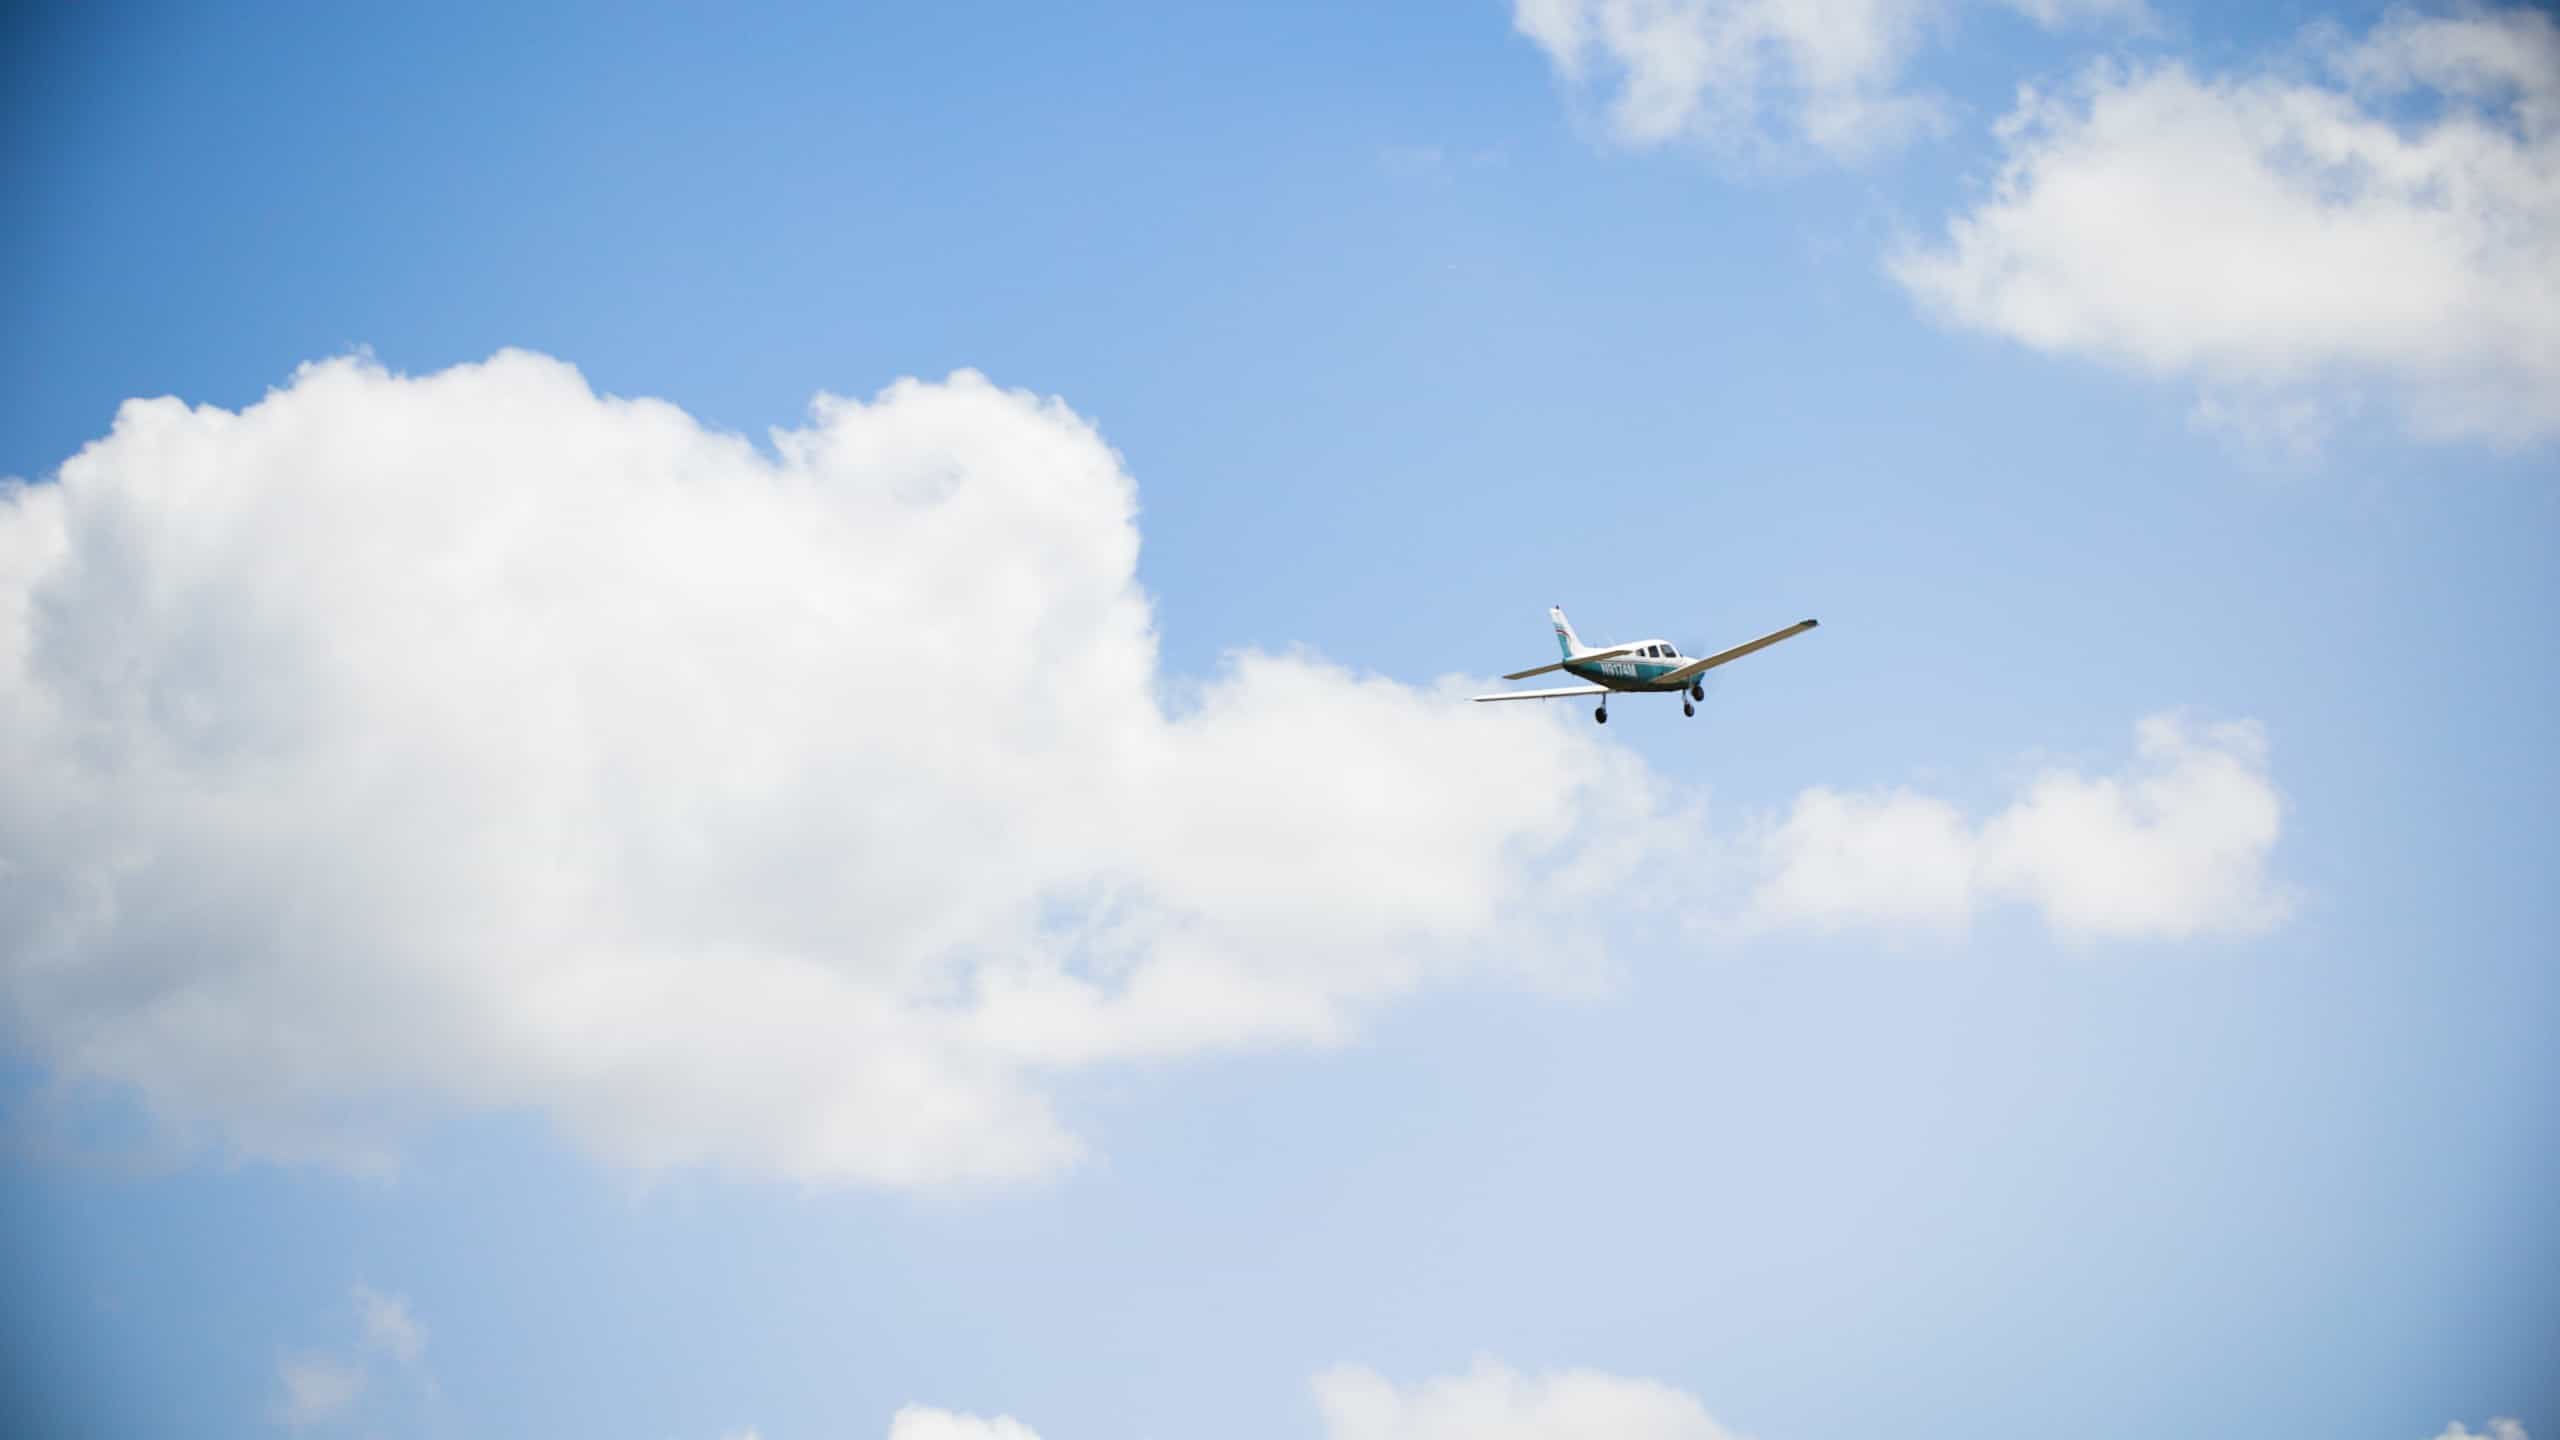 Small airplane flying against a blue sky with white clouds